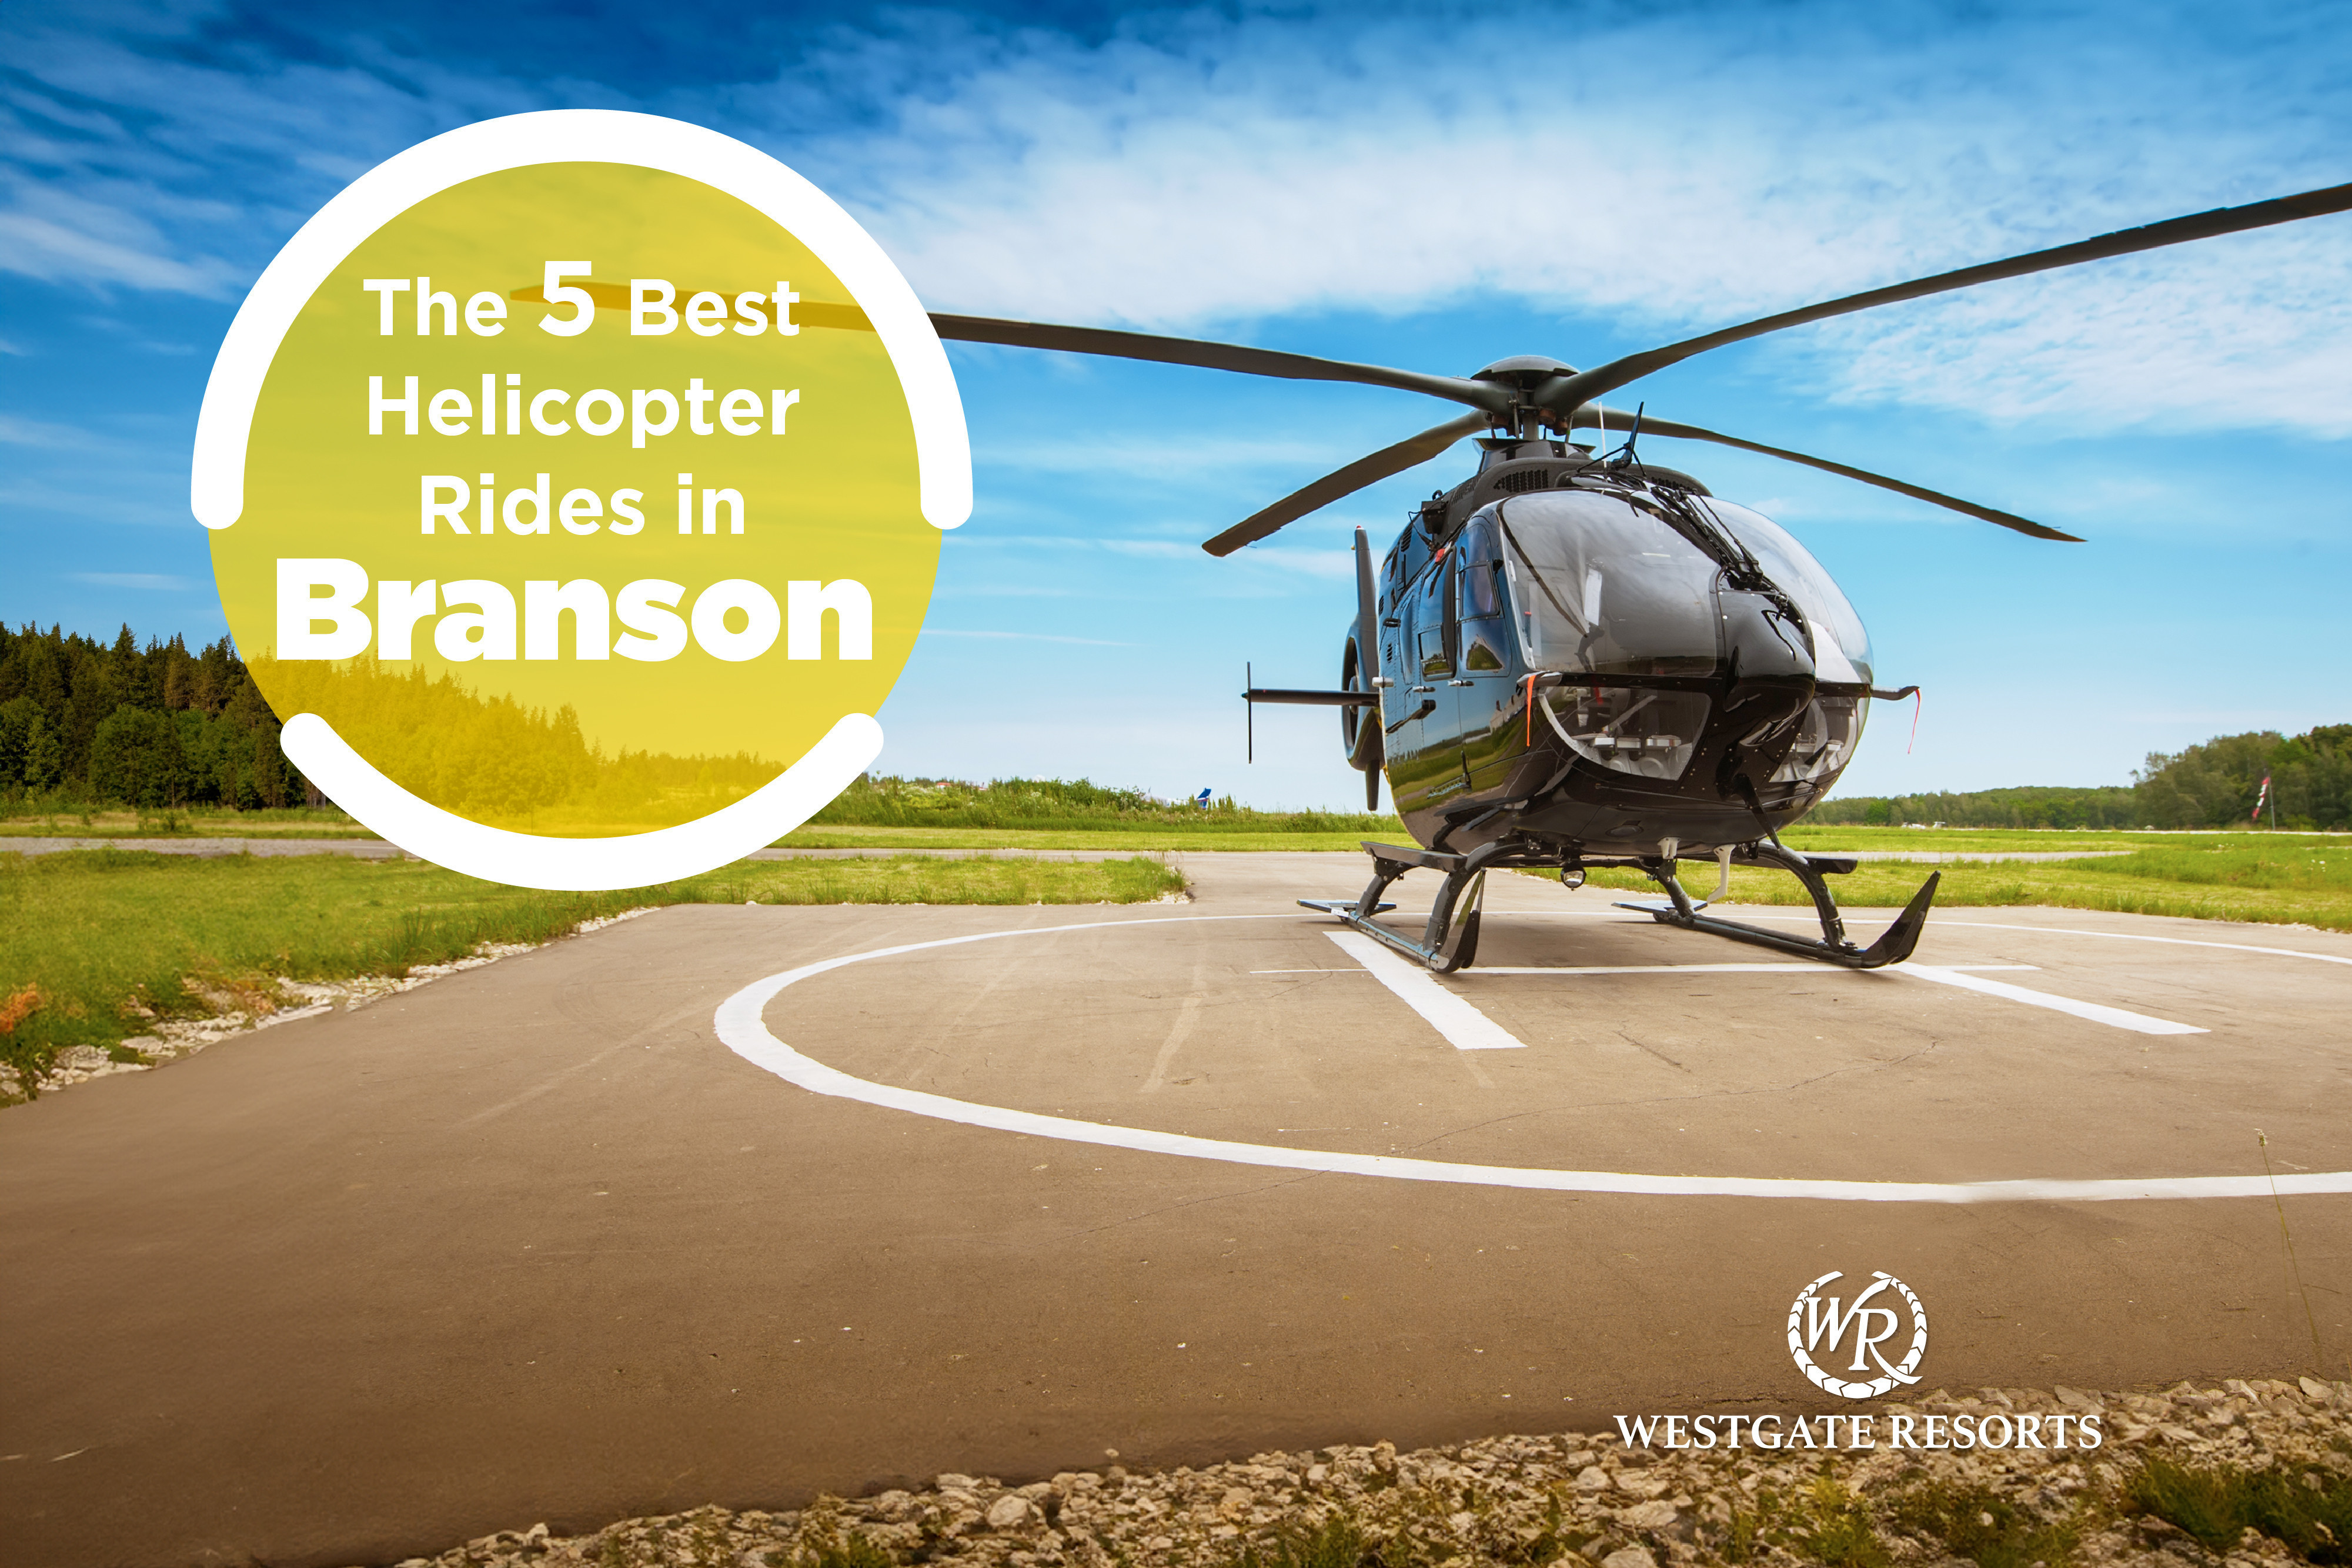 Where to Find the Best Helicopter Rides in Branson